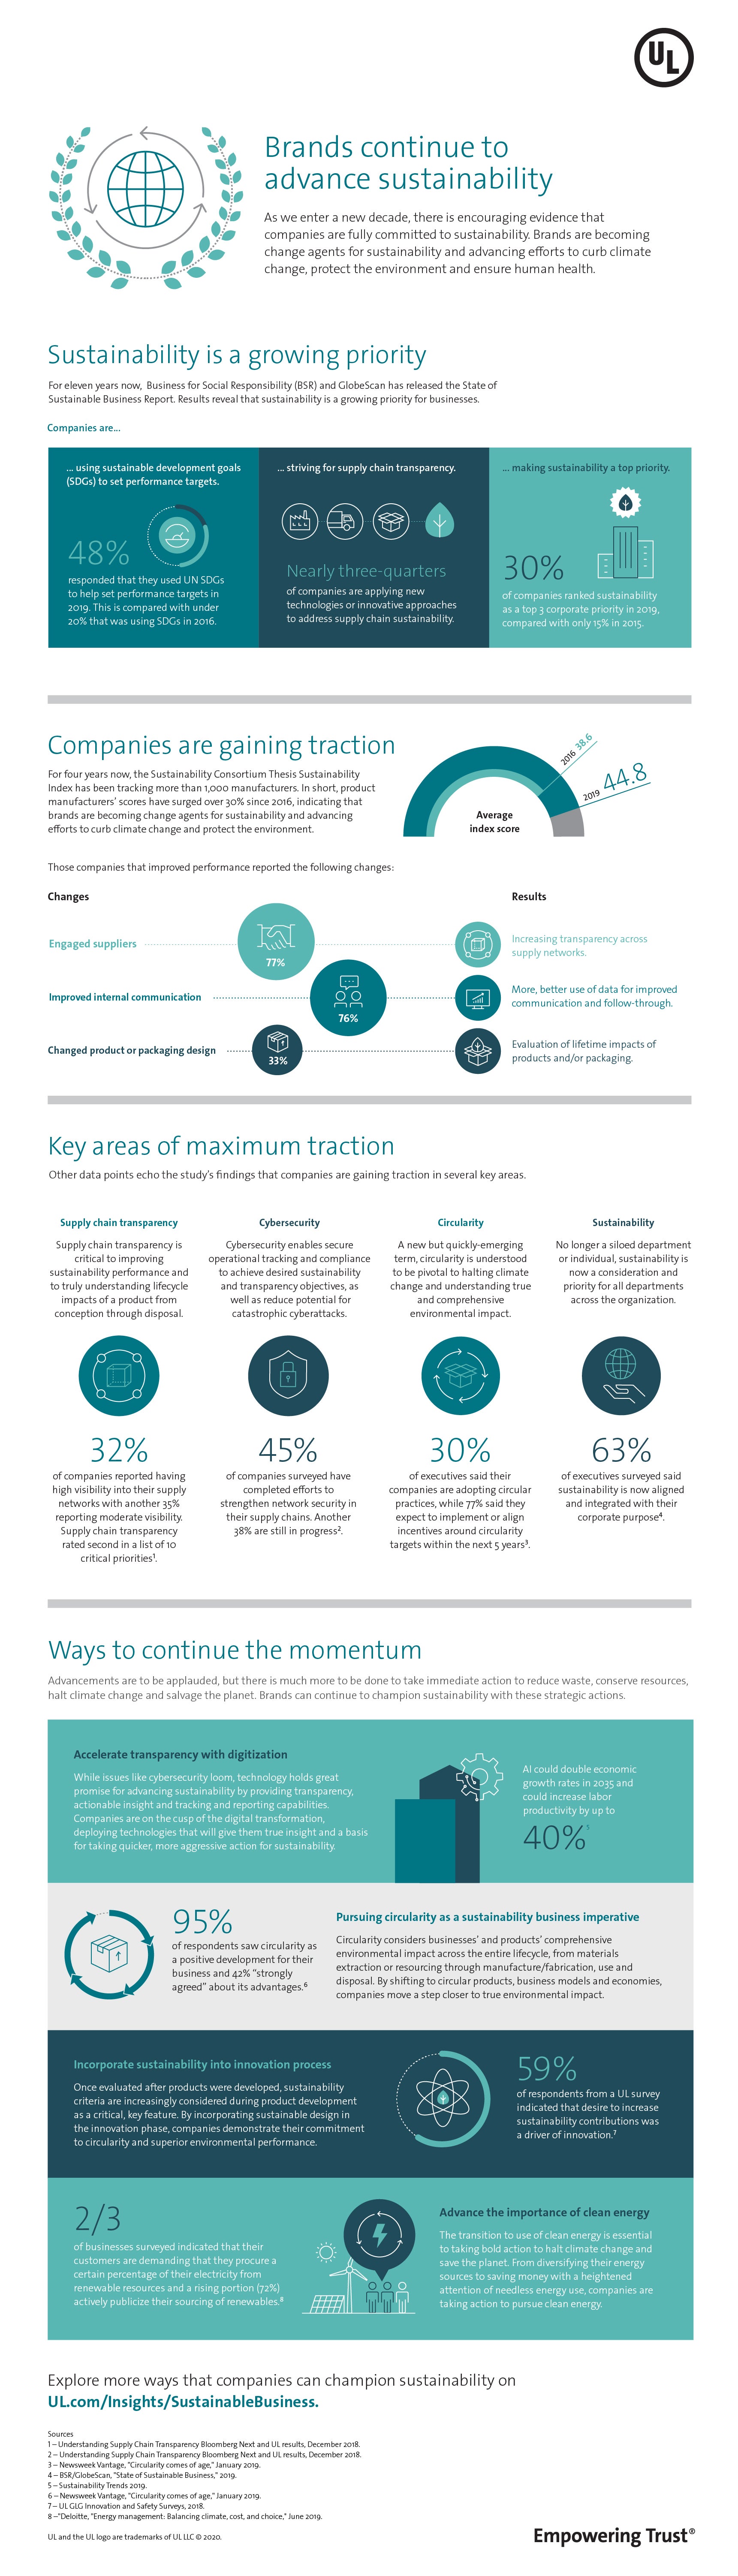 Brand continue to advance sustainability infographic